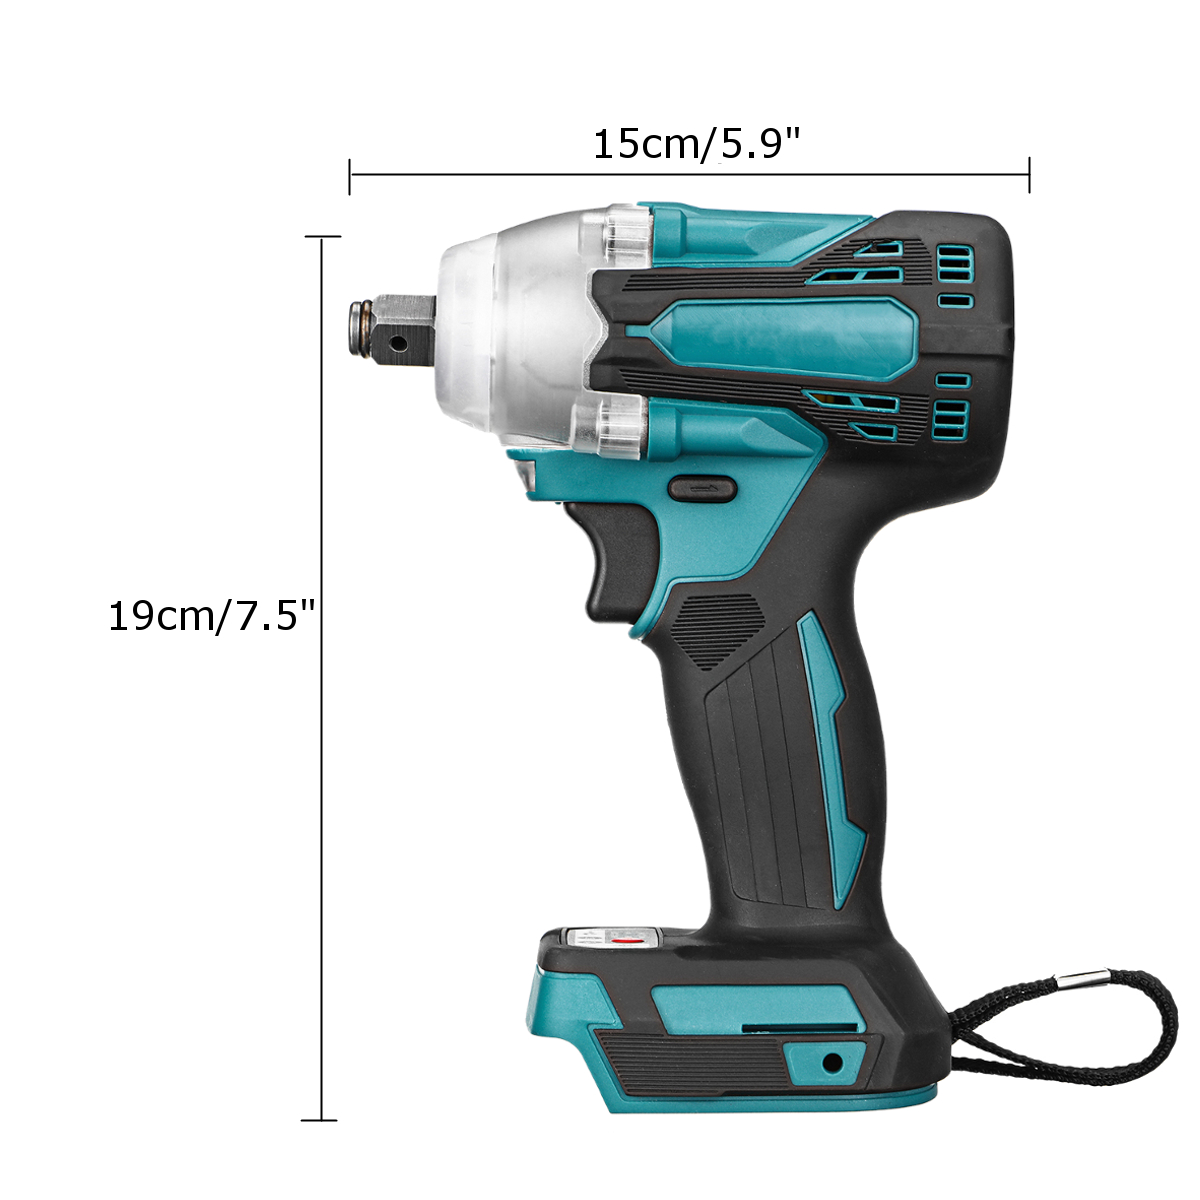 DTW300-2-in1-18V-800Nm-Li-Ion-Brushless-Cordless-12quot-Electric-Wrench-14quotScrewdriver-Drill-Repl-1854869-14